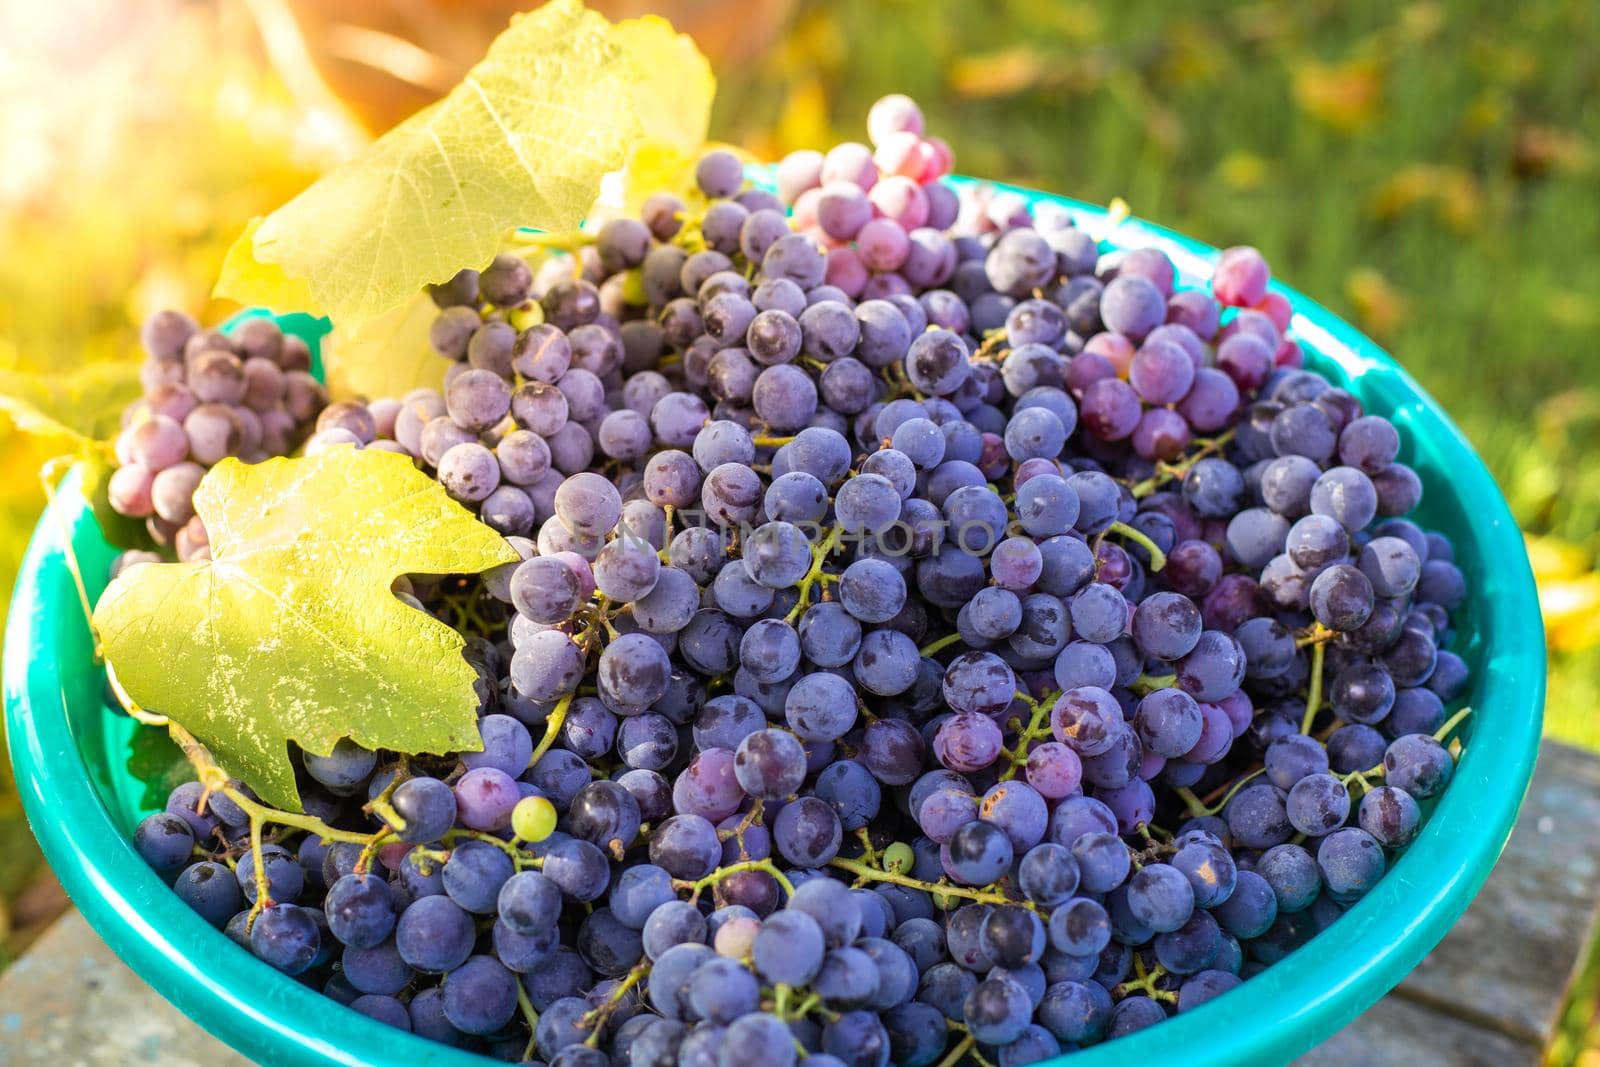 A full basket of ripe black grapes. Harvesting fruits in autumn at the farm by levnat09